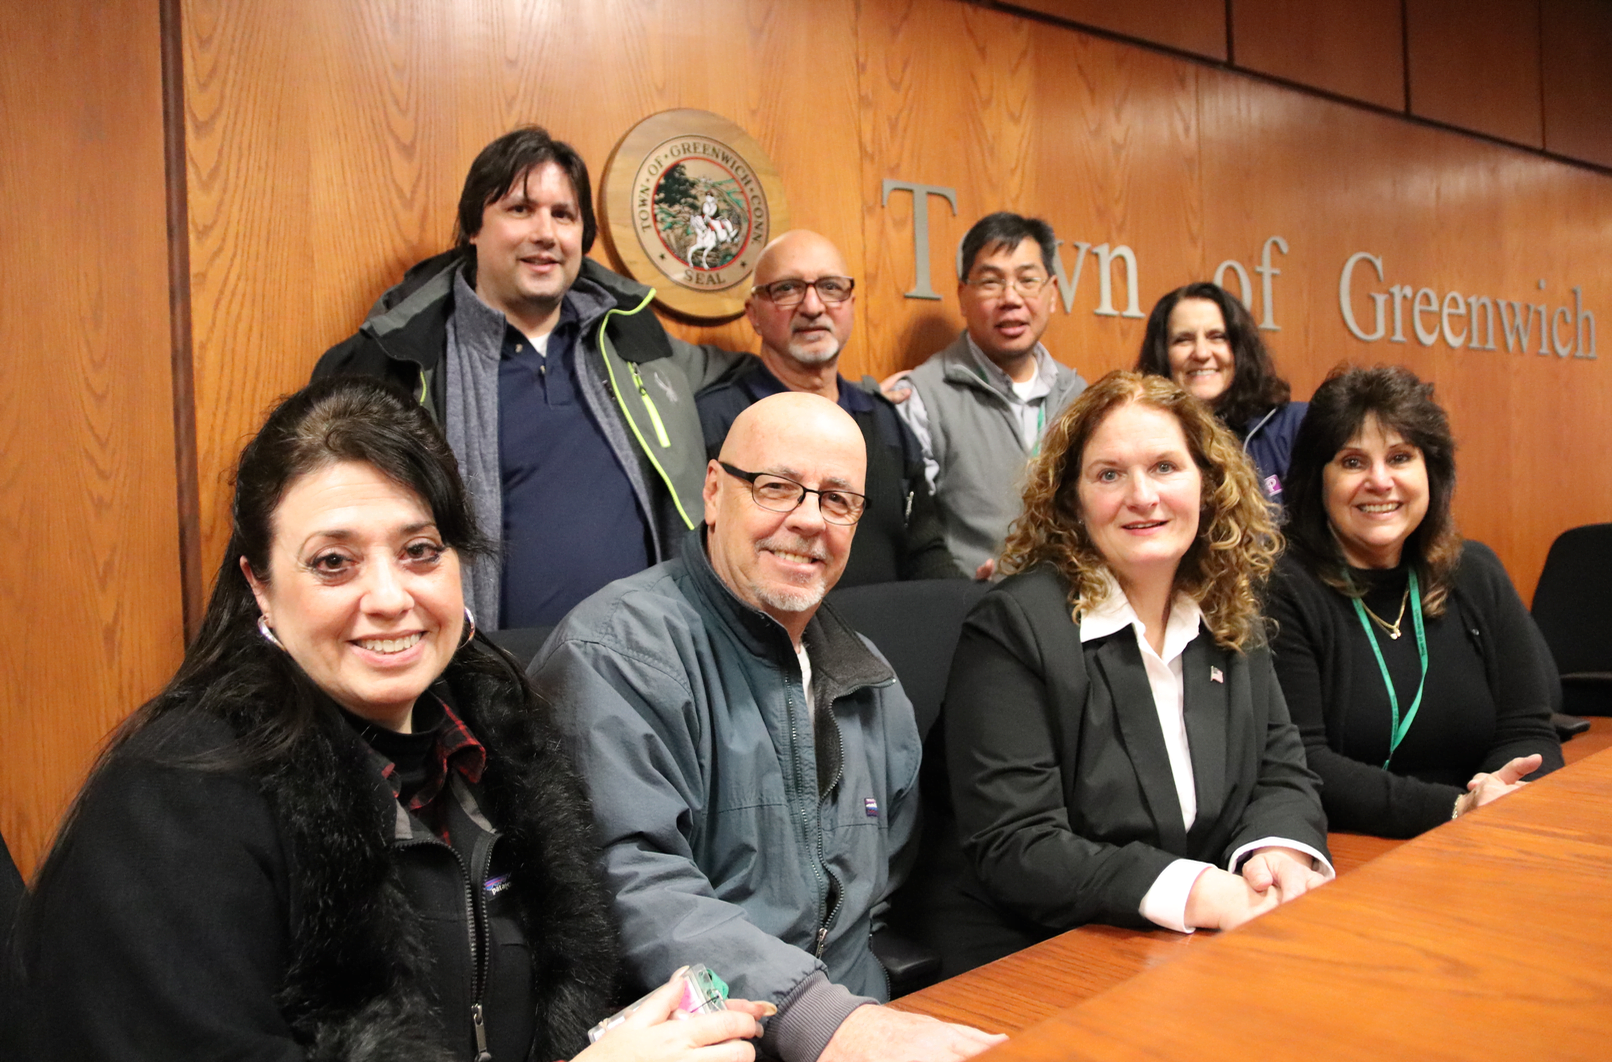 Heather Smeriglio with employees from the Parking Services Department she leaves behind to serve as Greenwich Tax Collector. Dec 19, 2019 Photo: Leslie Yager